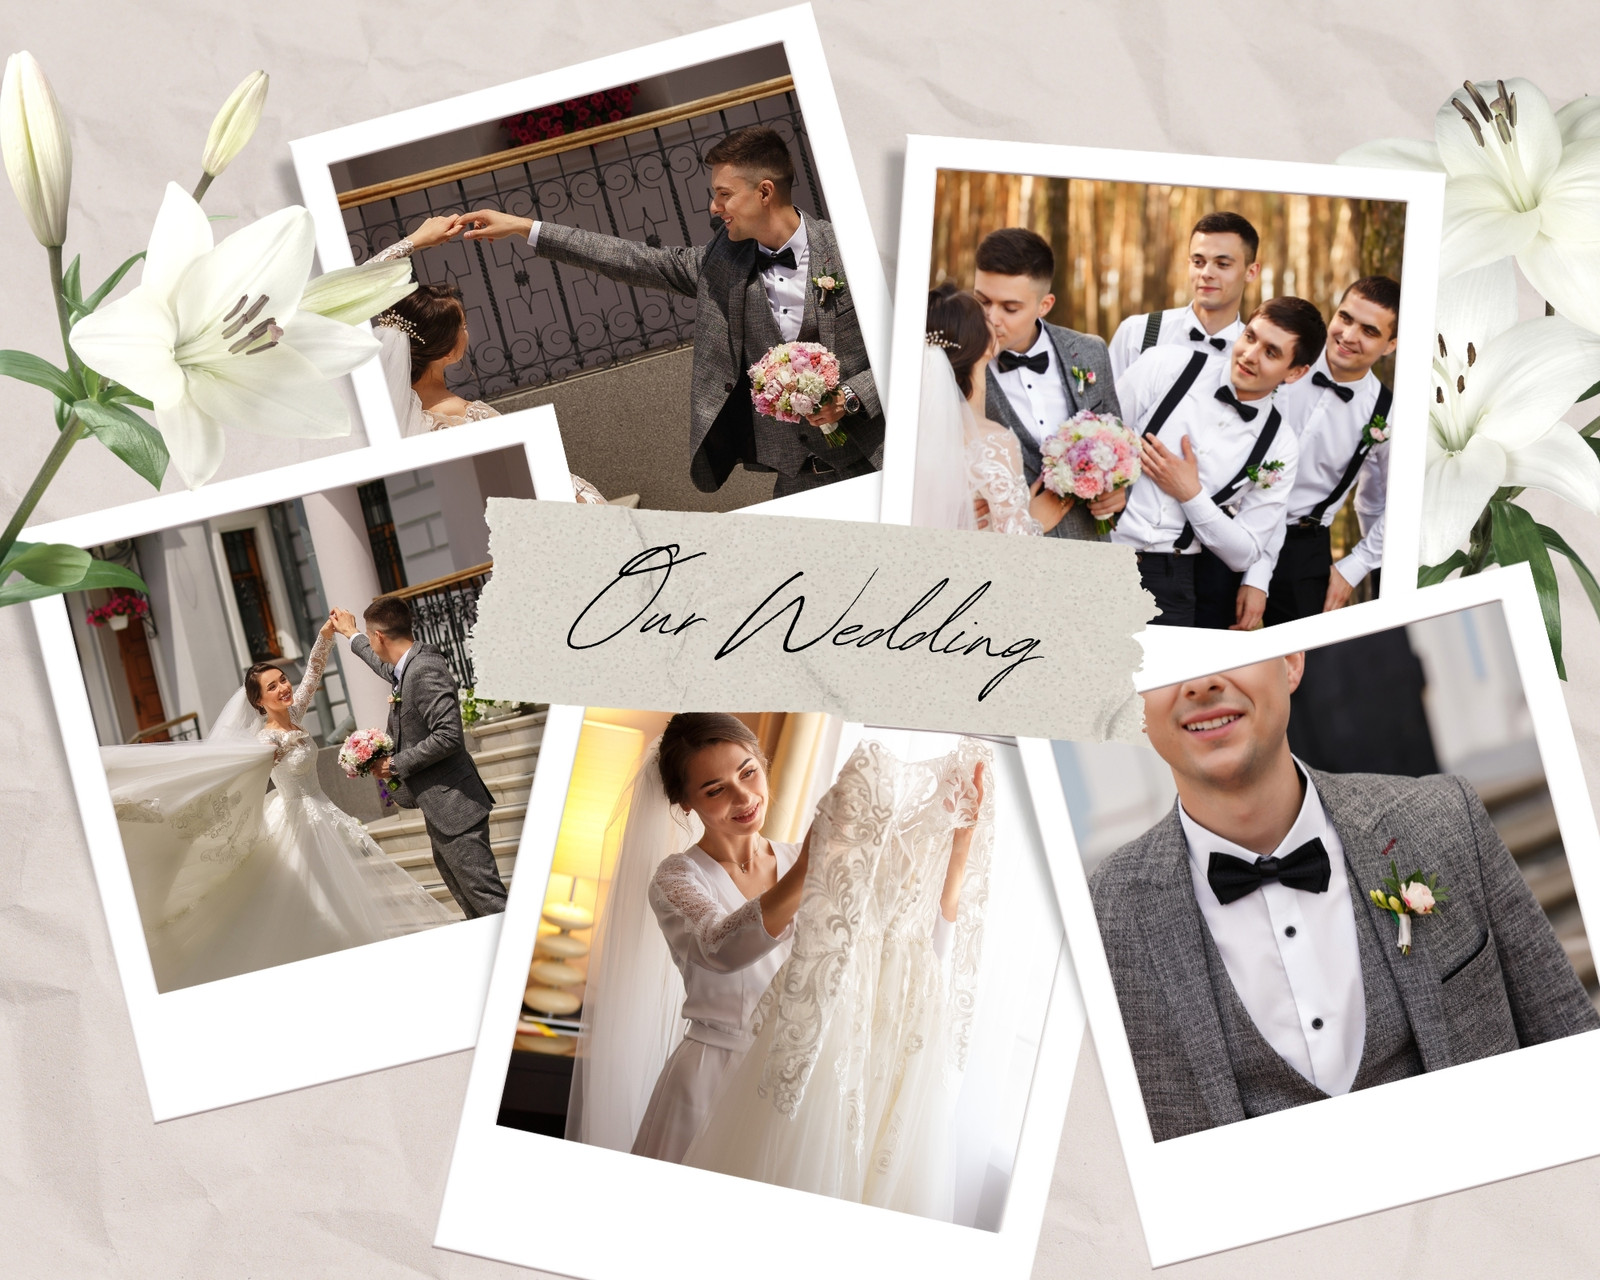 Create Your Own Wedding Photo Album and Save Money